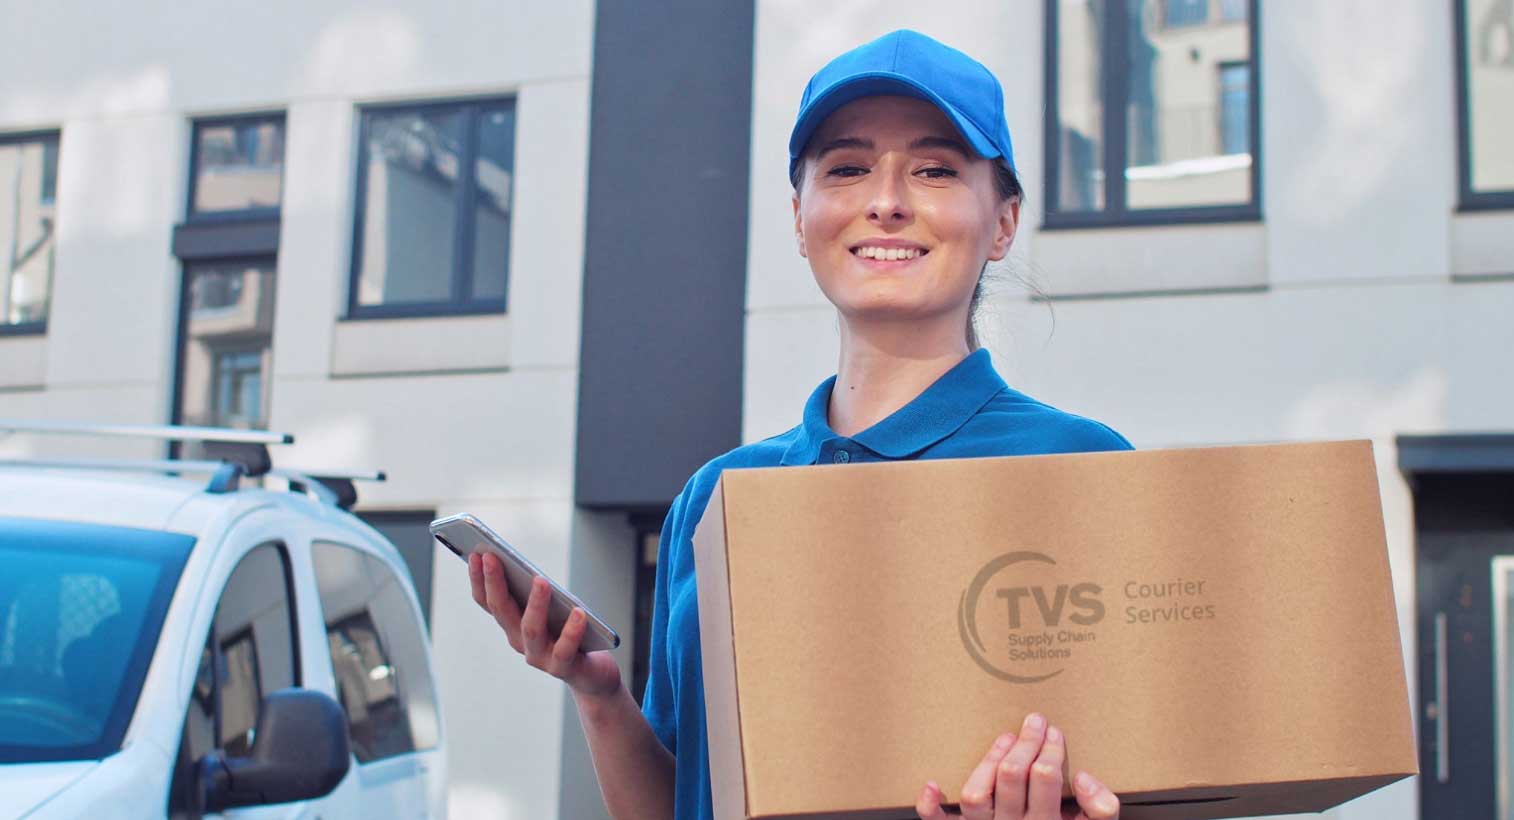 Because Delivery Counts - TVS SCS Courier Services